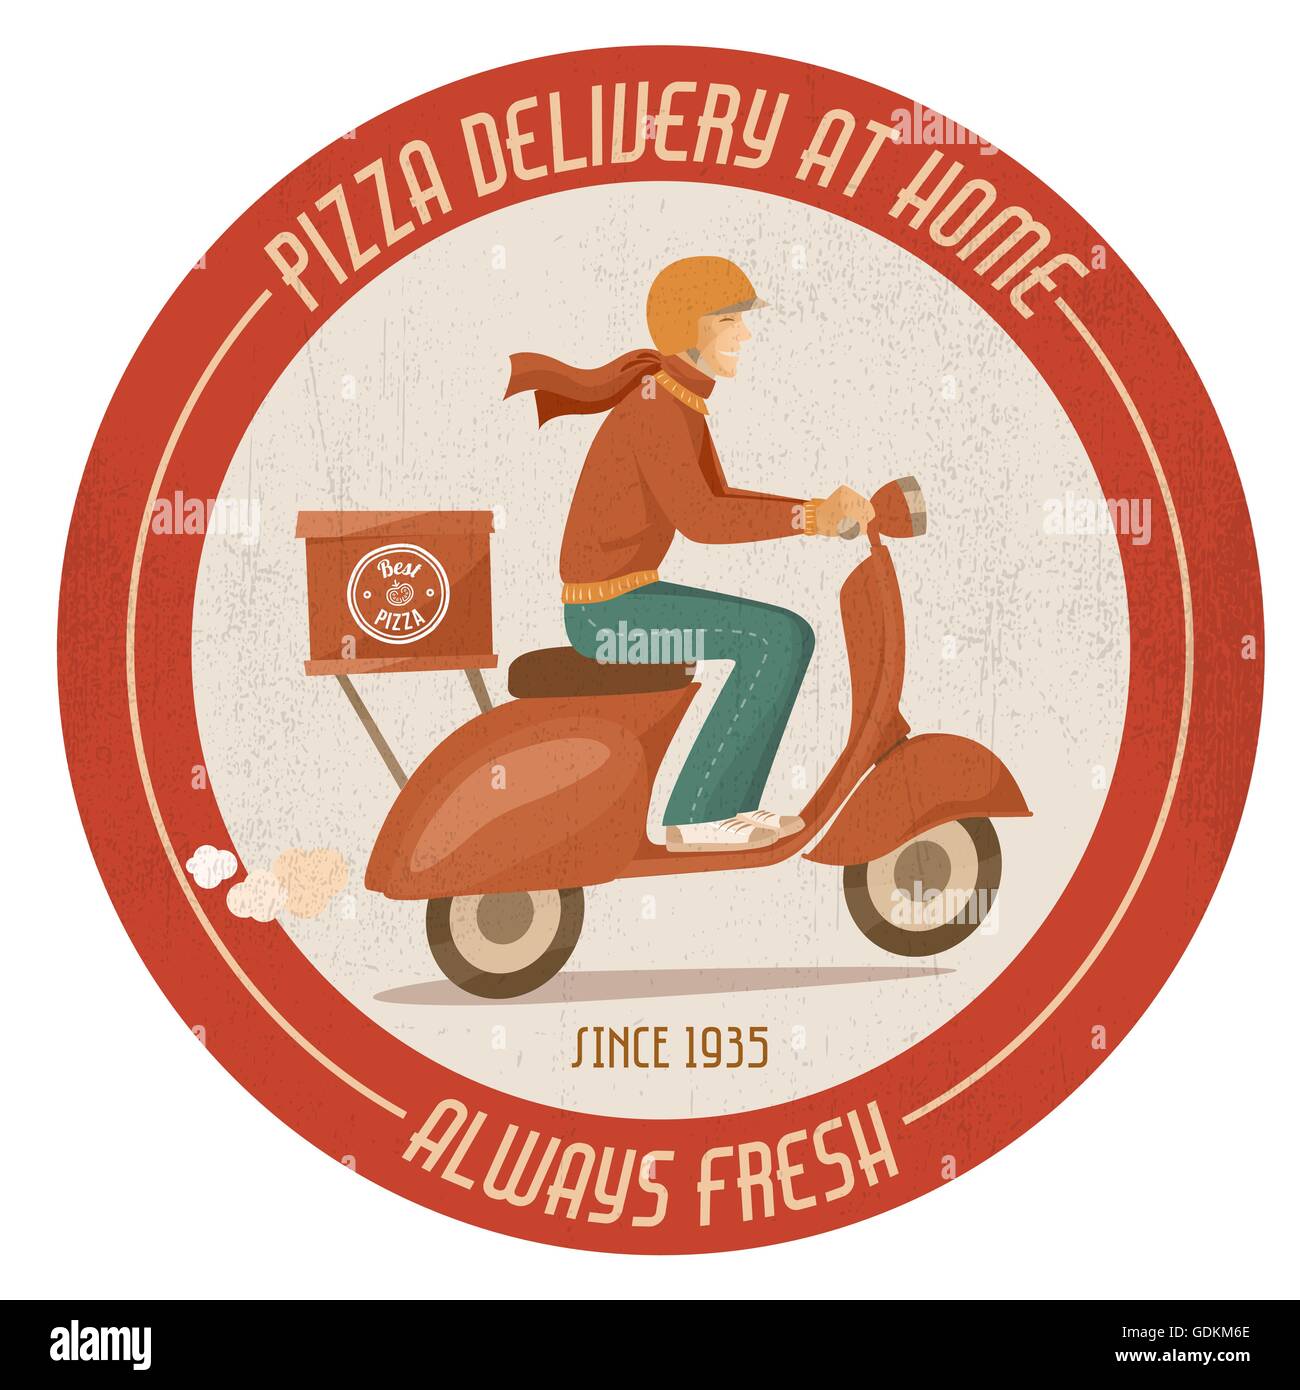 Pizza delivery guy at work on a red scooter vintage badge Stock Vector